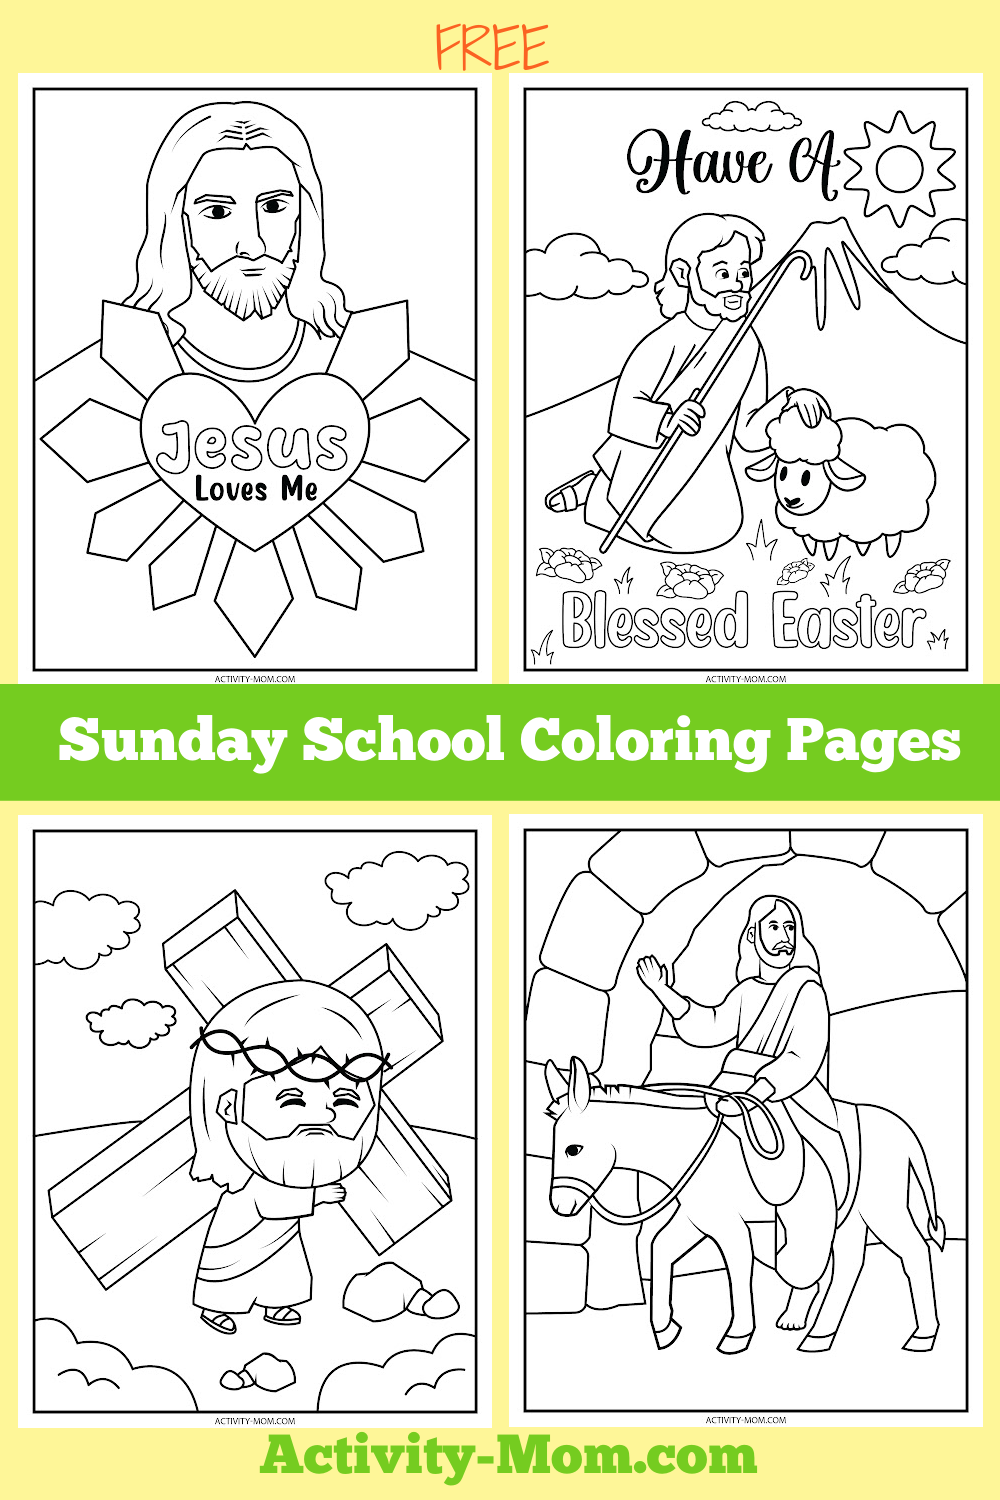 Sunday school coloring pages free printable